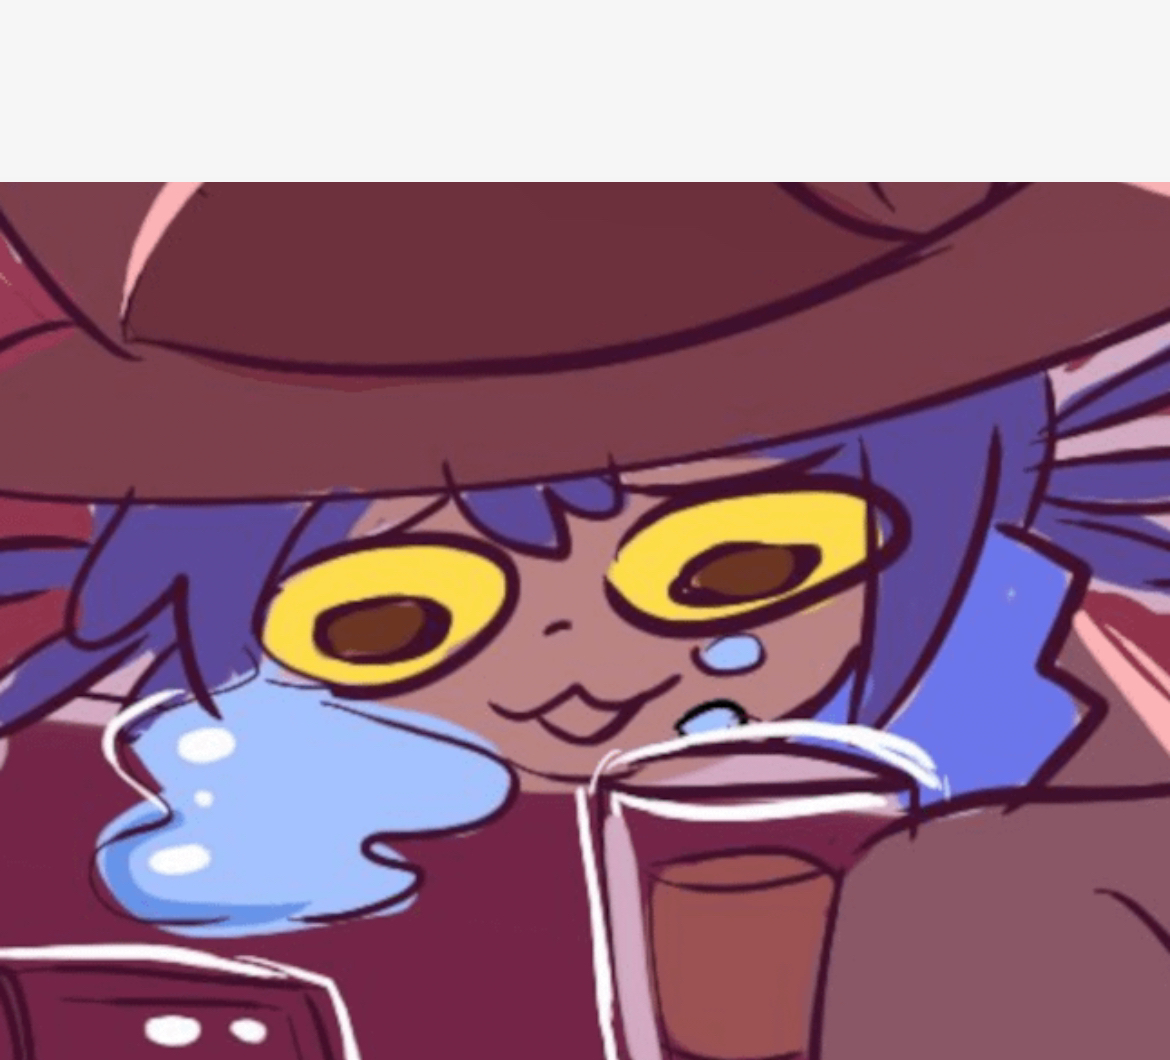 Niko drinking and crying Blank Meme Template